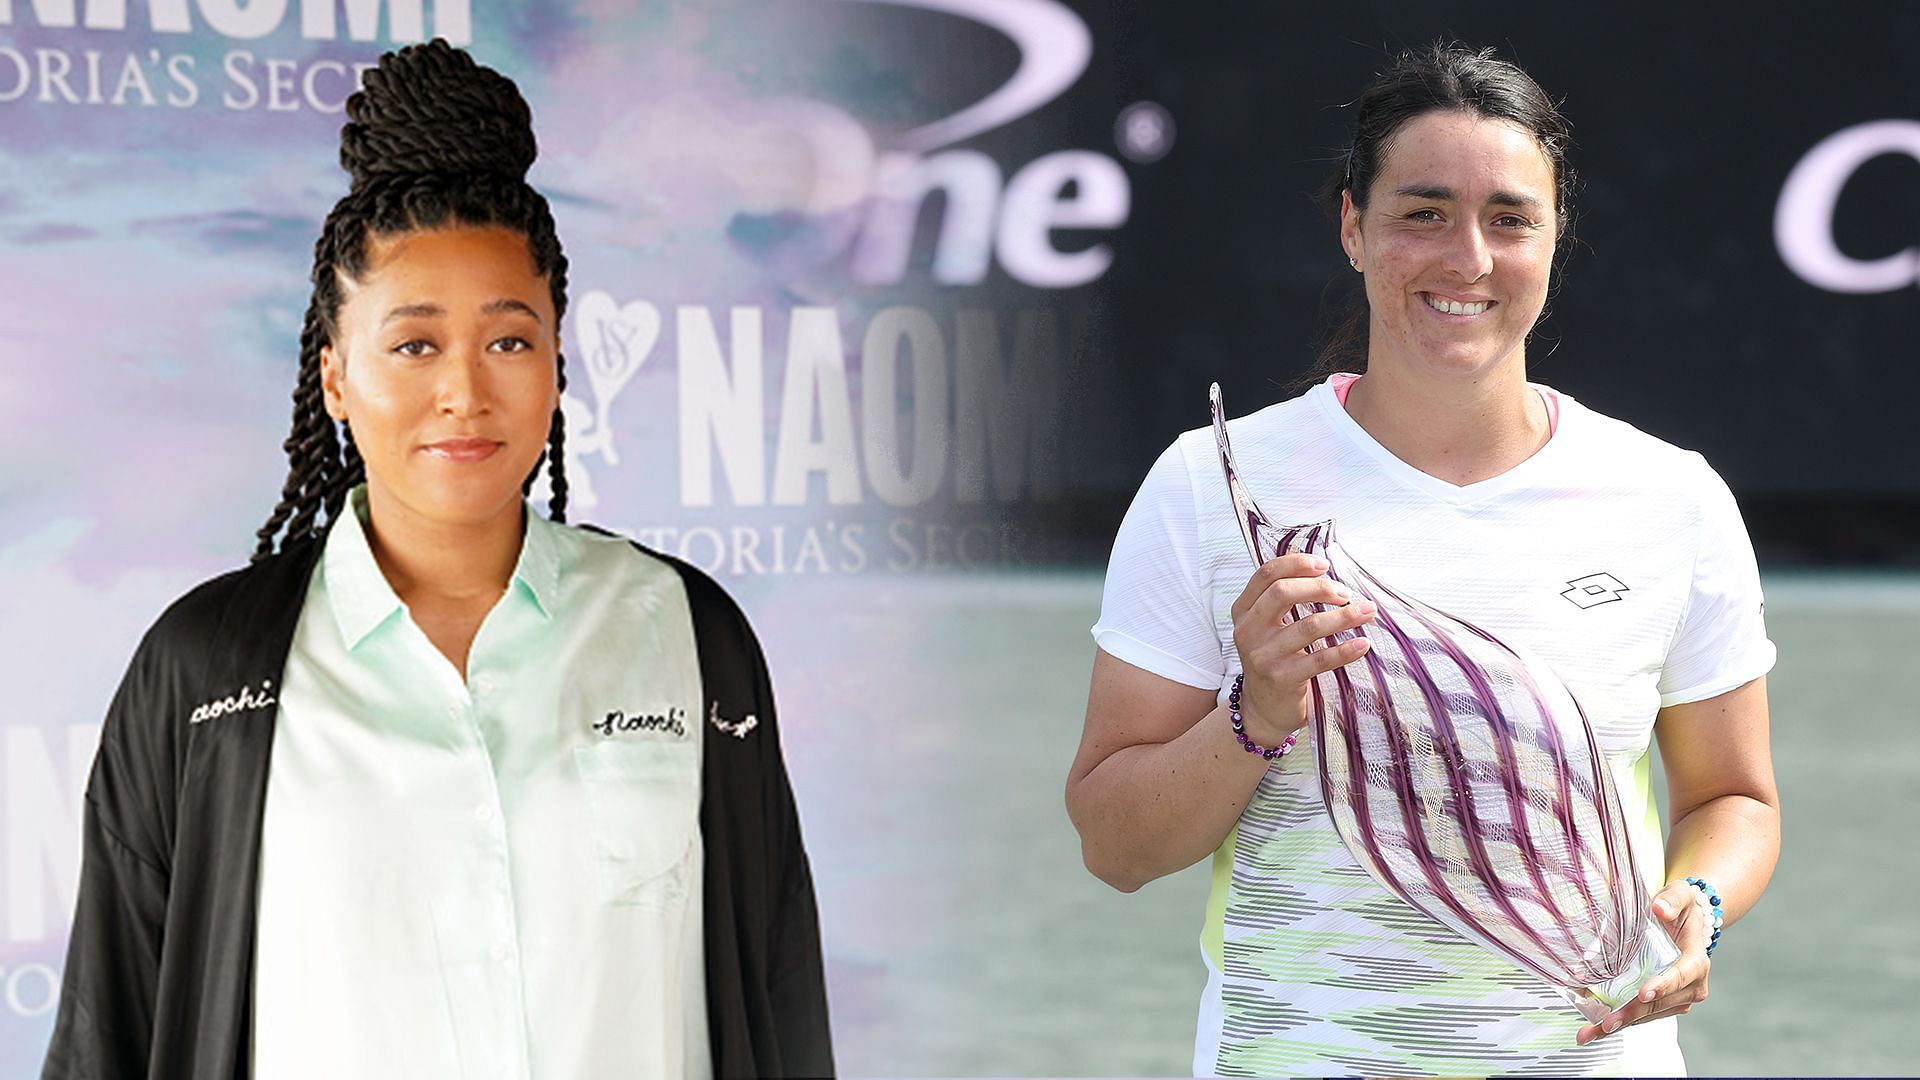 Naomi Osaka wishes Ons Jabeur on her fantastic performance in Charleston 